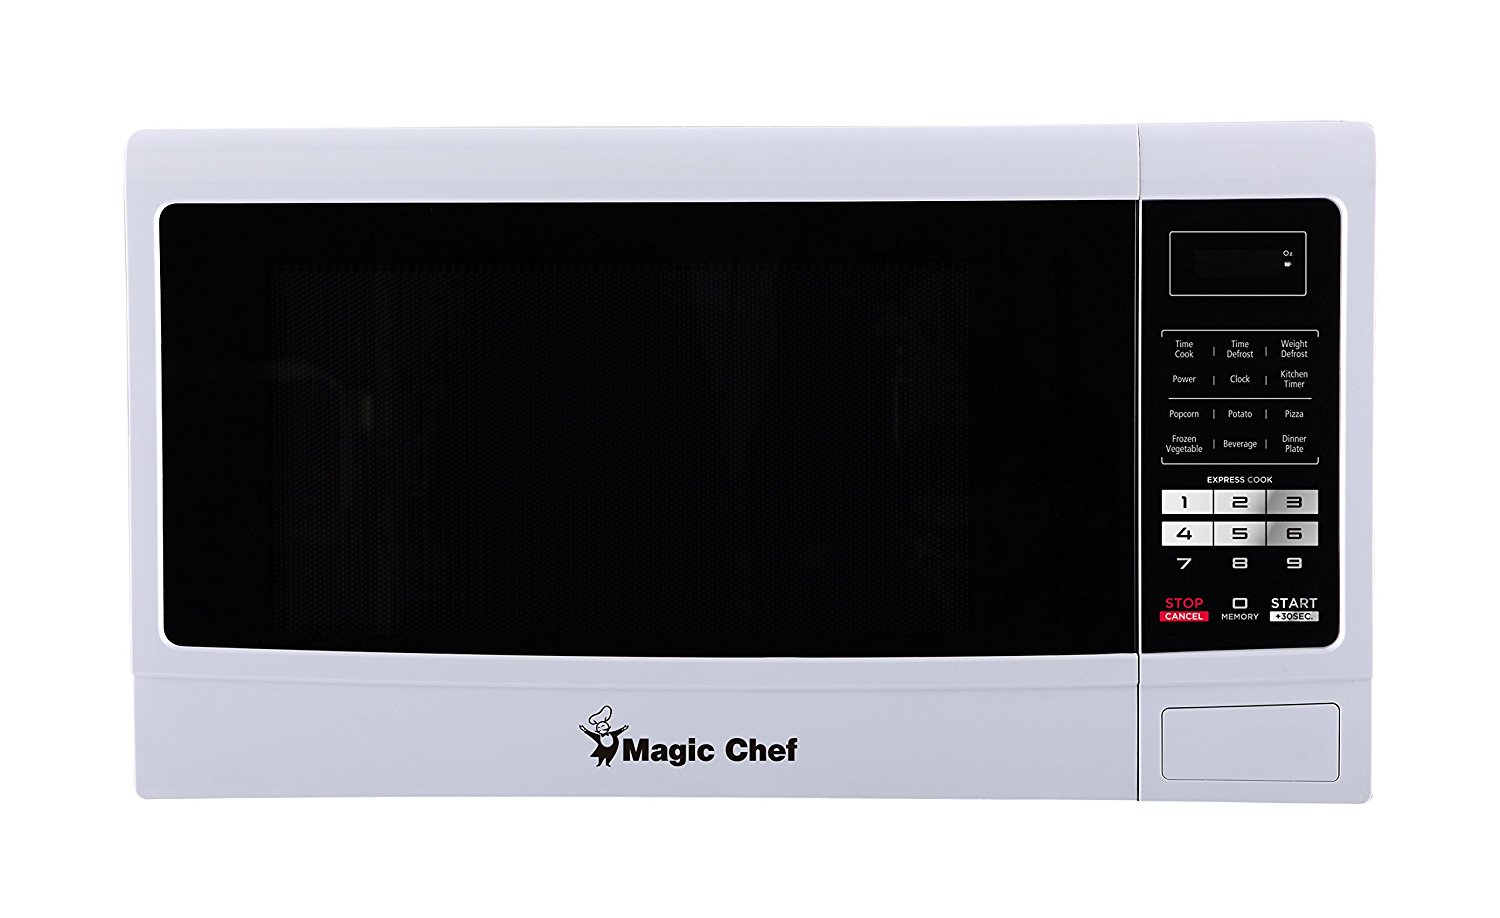 Magic Chef MCM1611W 1100W Microwave Oven, 1.6 cu. ft., White